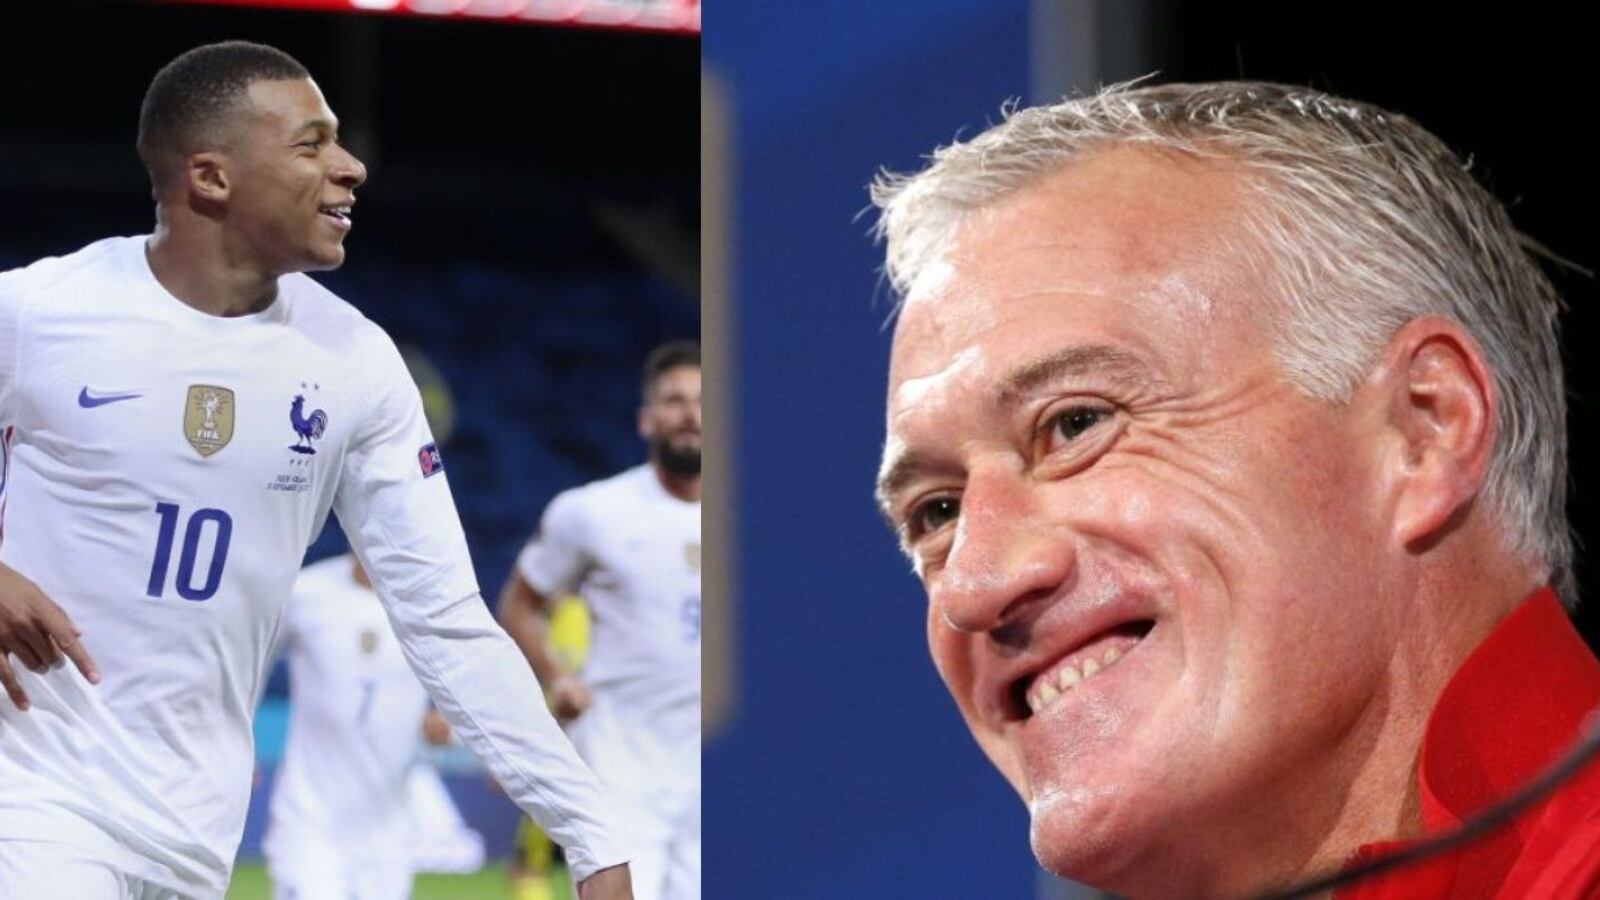 While he defends Mbappé's bad performance, here’s how Deschamps belittles his teammates